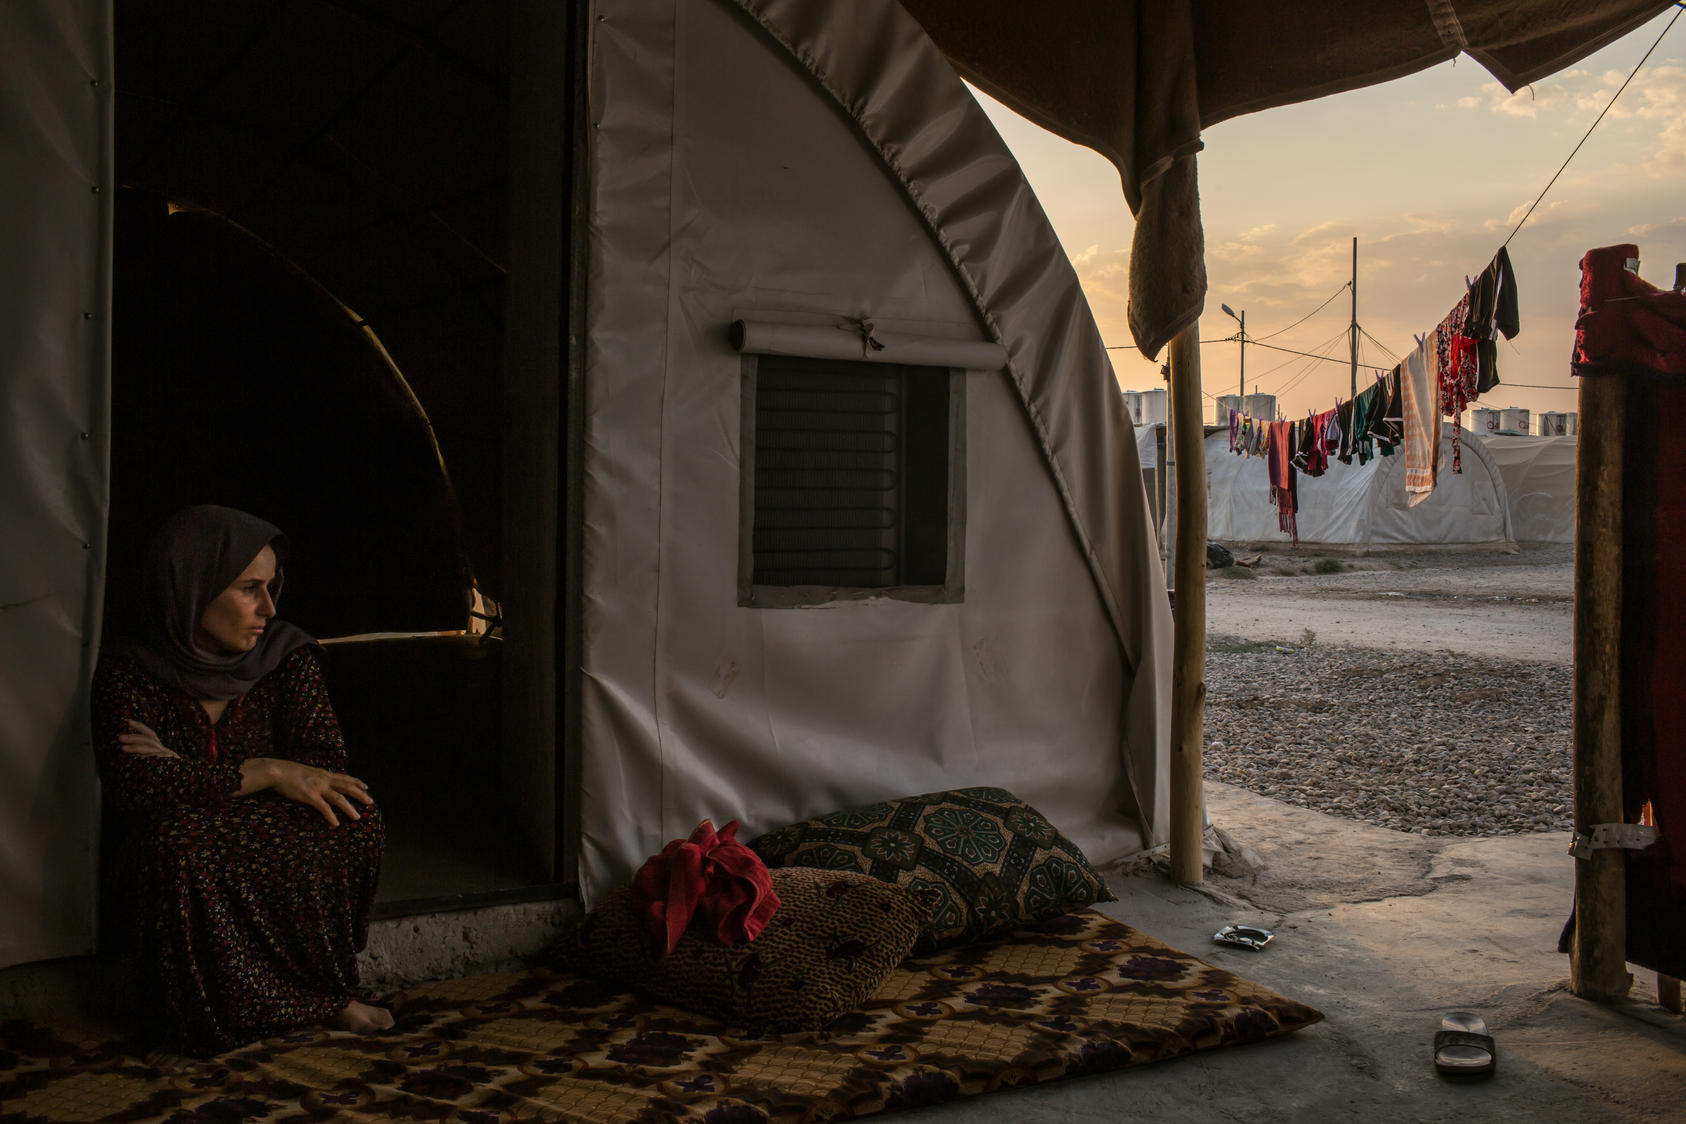 Aishan Ali Saleh, a member of the Yazidi minority, now living in a refugee camp outside Dohuk, Iraq, July 24, 2015. Residents of Kojo, her village, believed they could negotiate safe passage as Islamic State fighters took control of the area. Instead, the men were bound for death and the women and girls taken into sexual slavery — a practice encouraged by the group’s theologians.